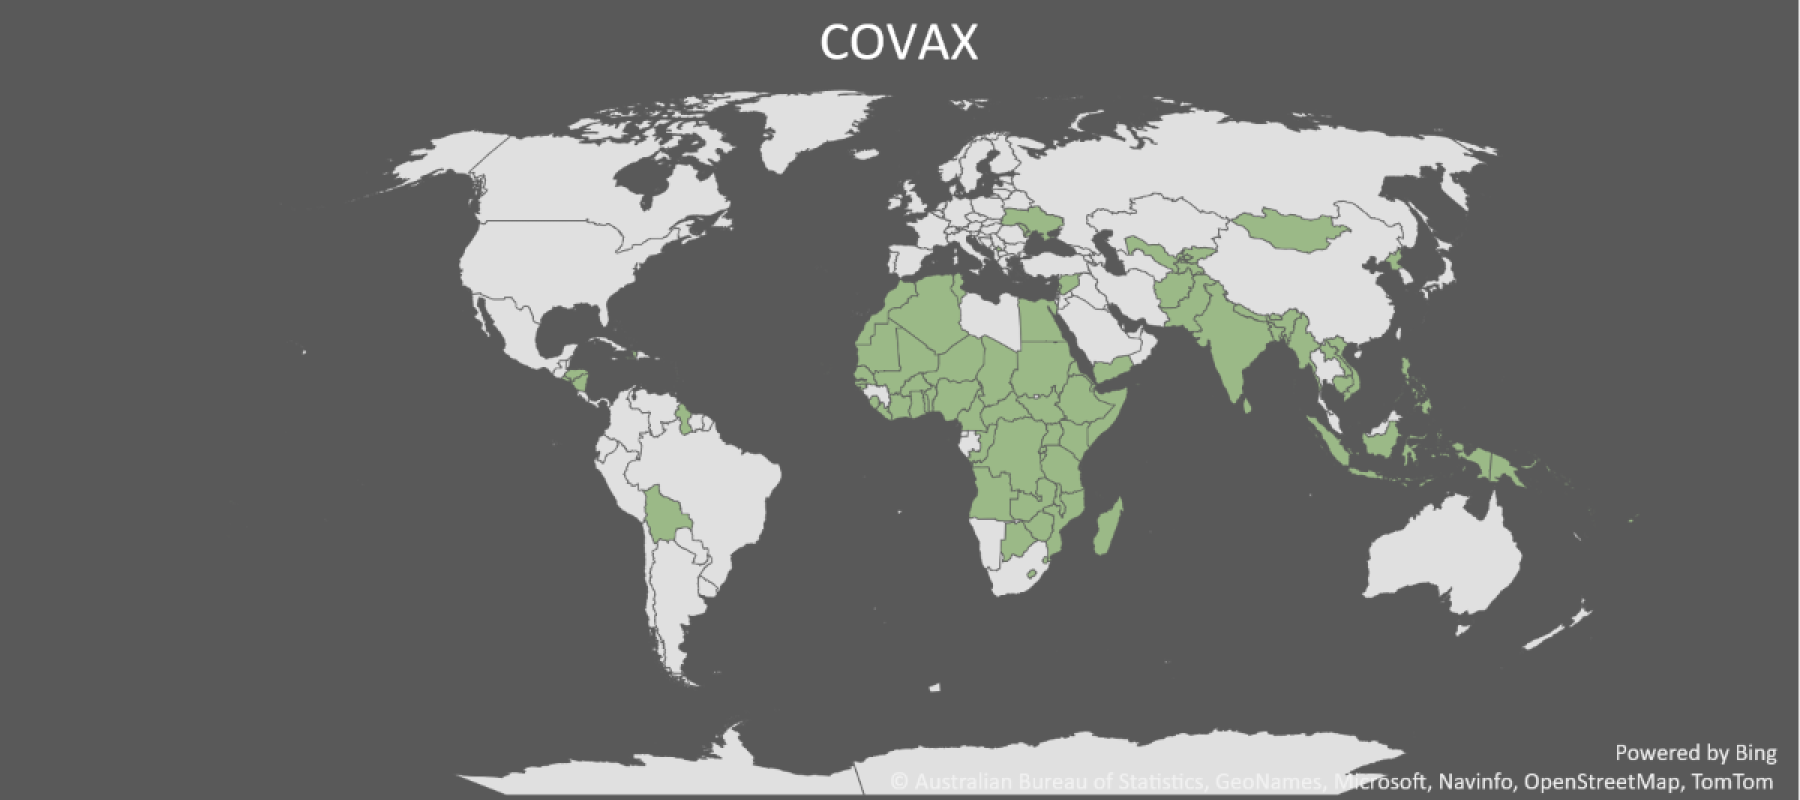 World map showing countries covered by the COVAX Covid Vaccine no-fault compensation scheme